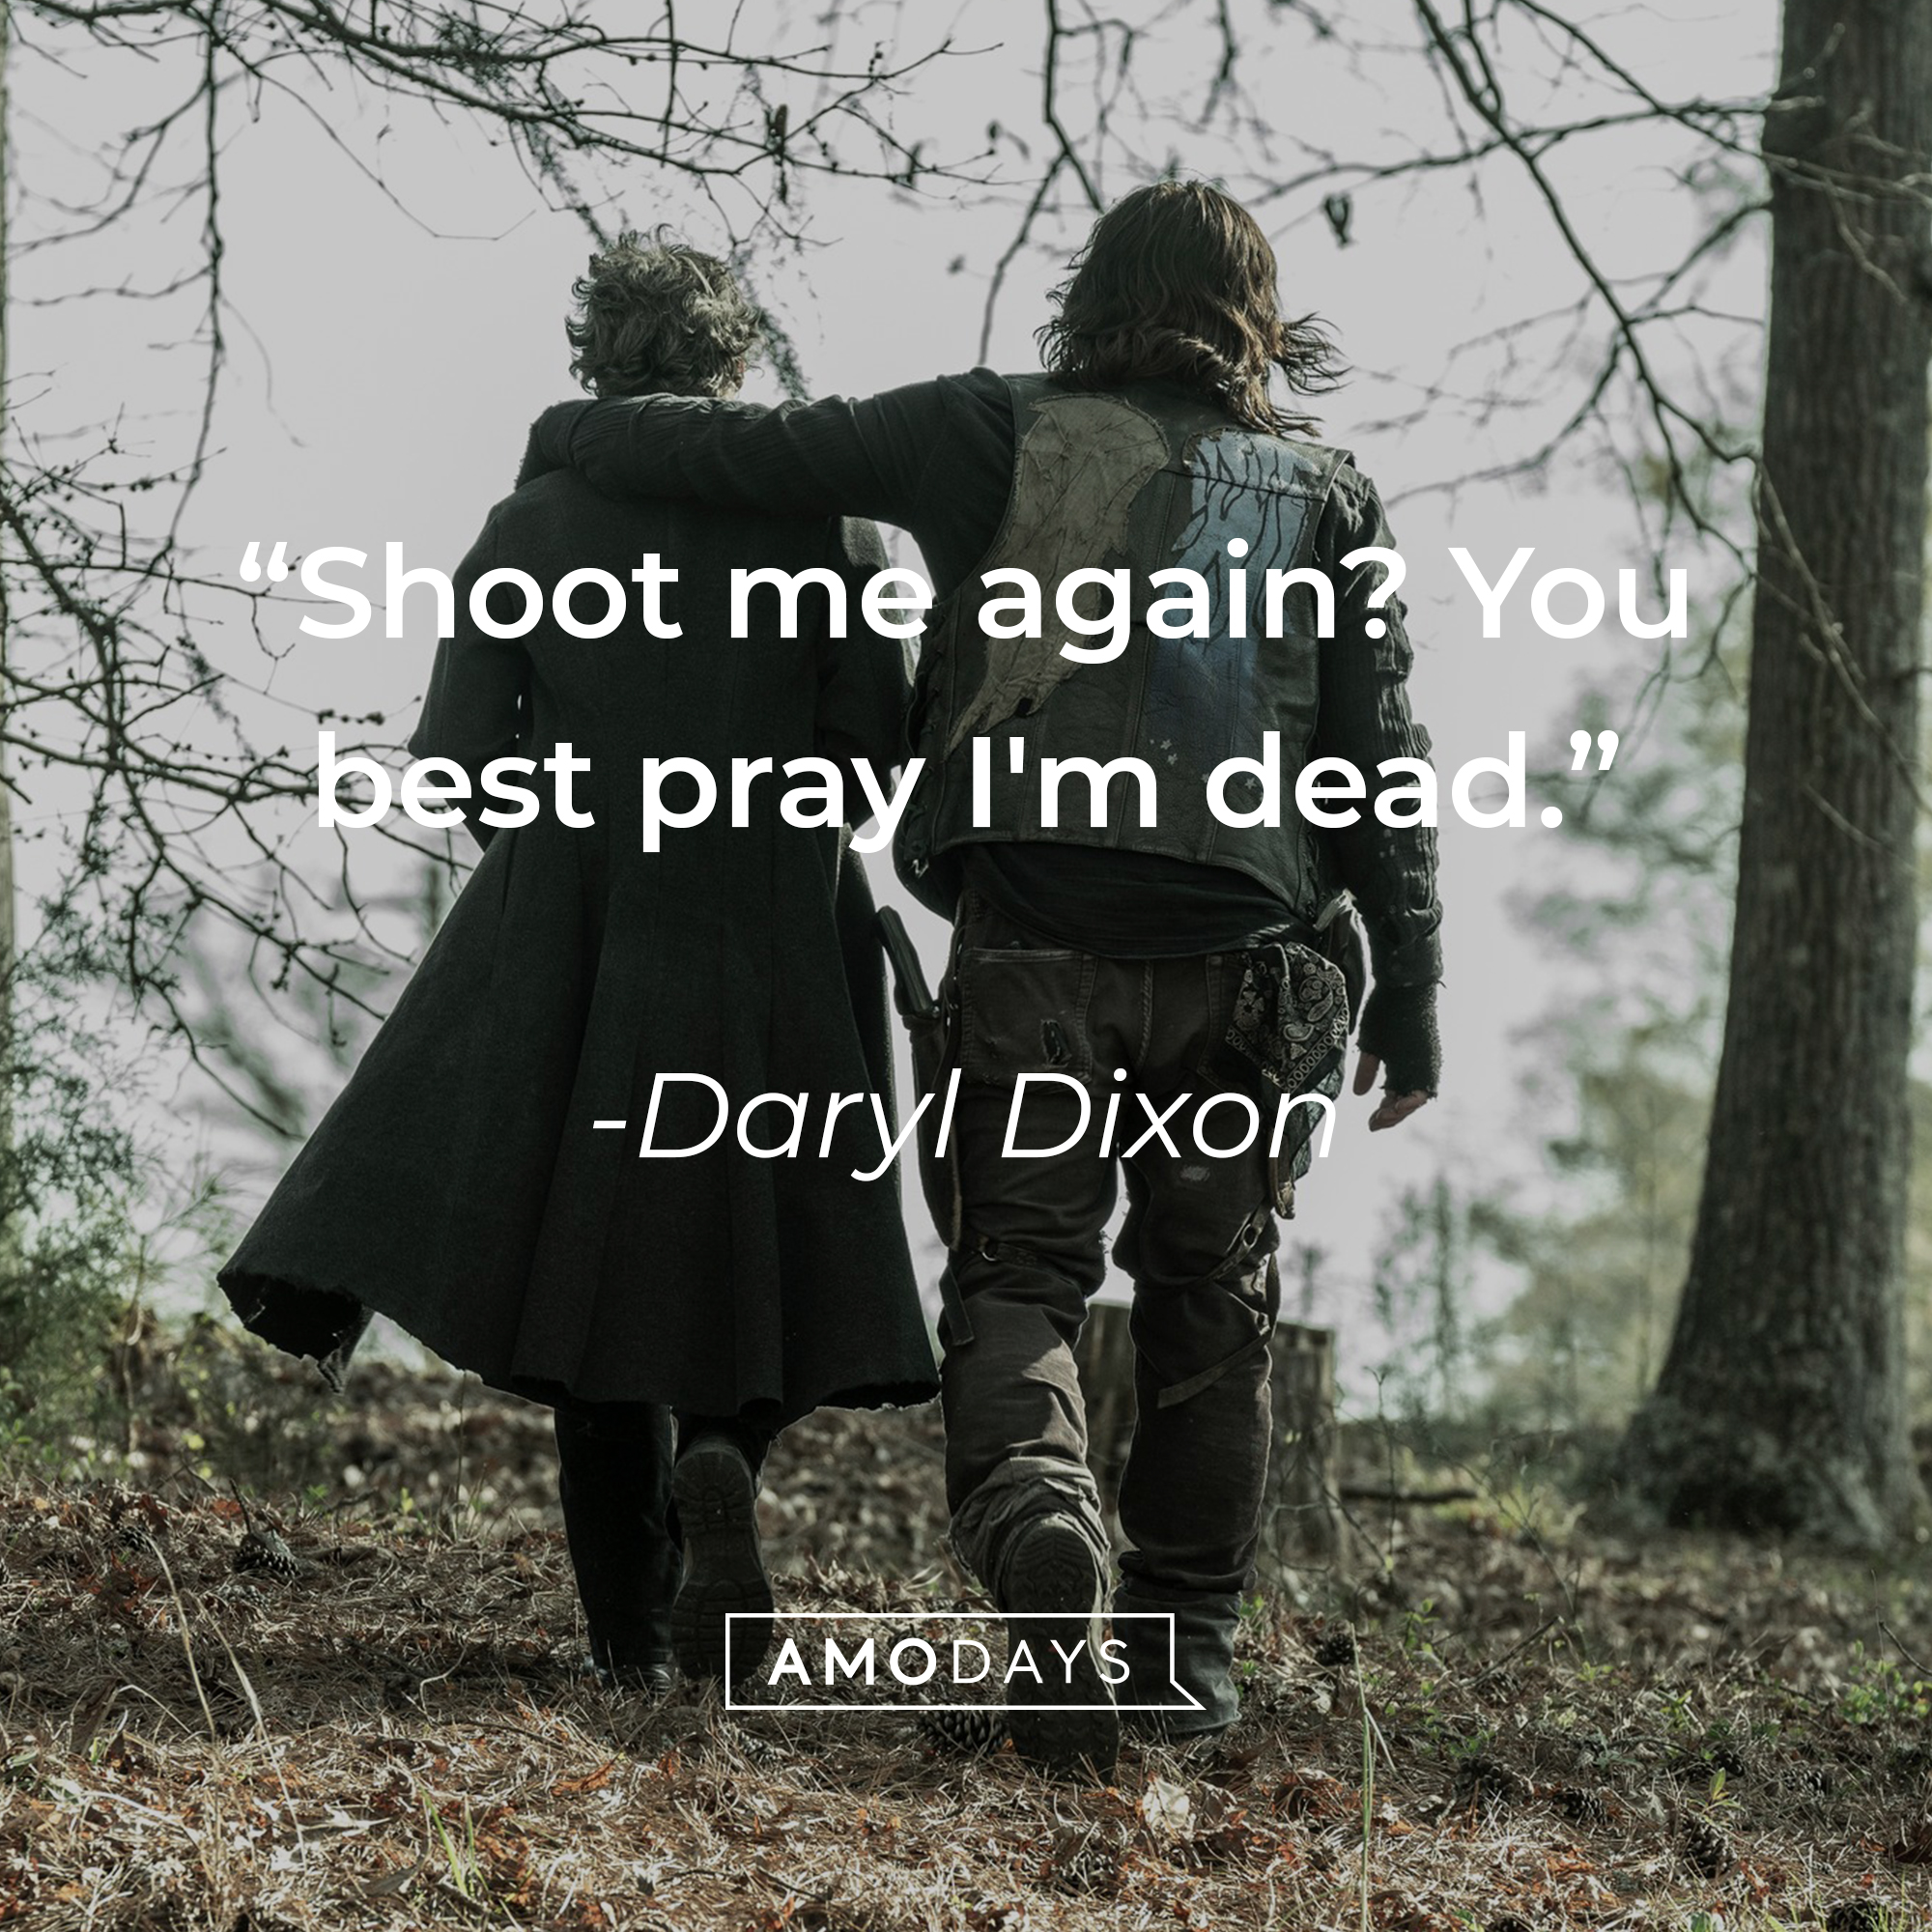 An image of Daryl Dixon with his quote: “Shoot me again? You best pray I'm dead.” | Source: facebook.com/TheWalkingDeadAMC